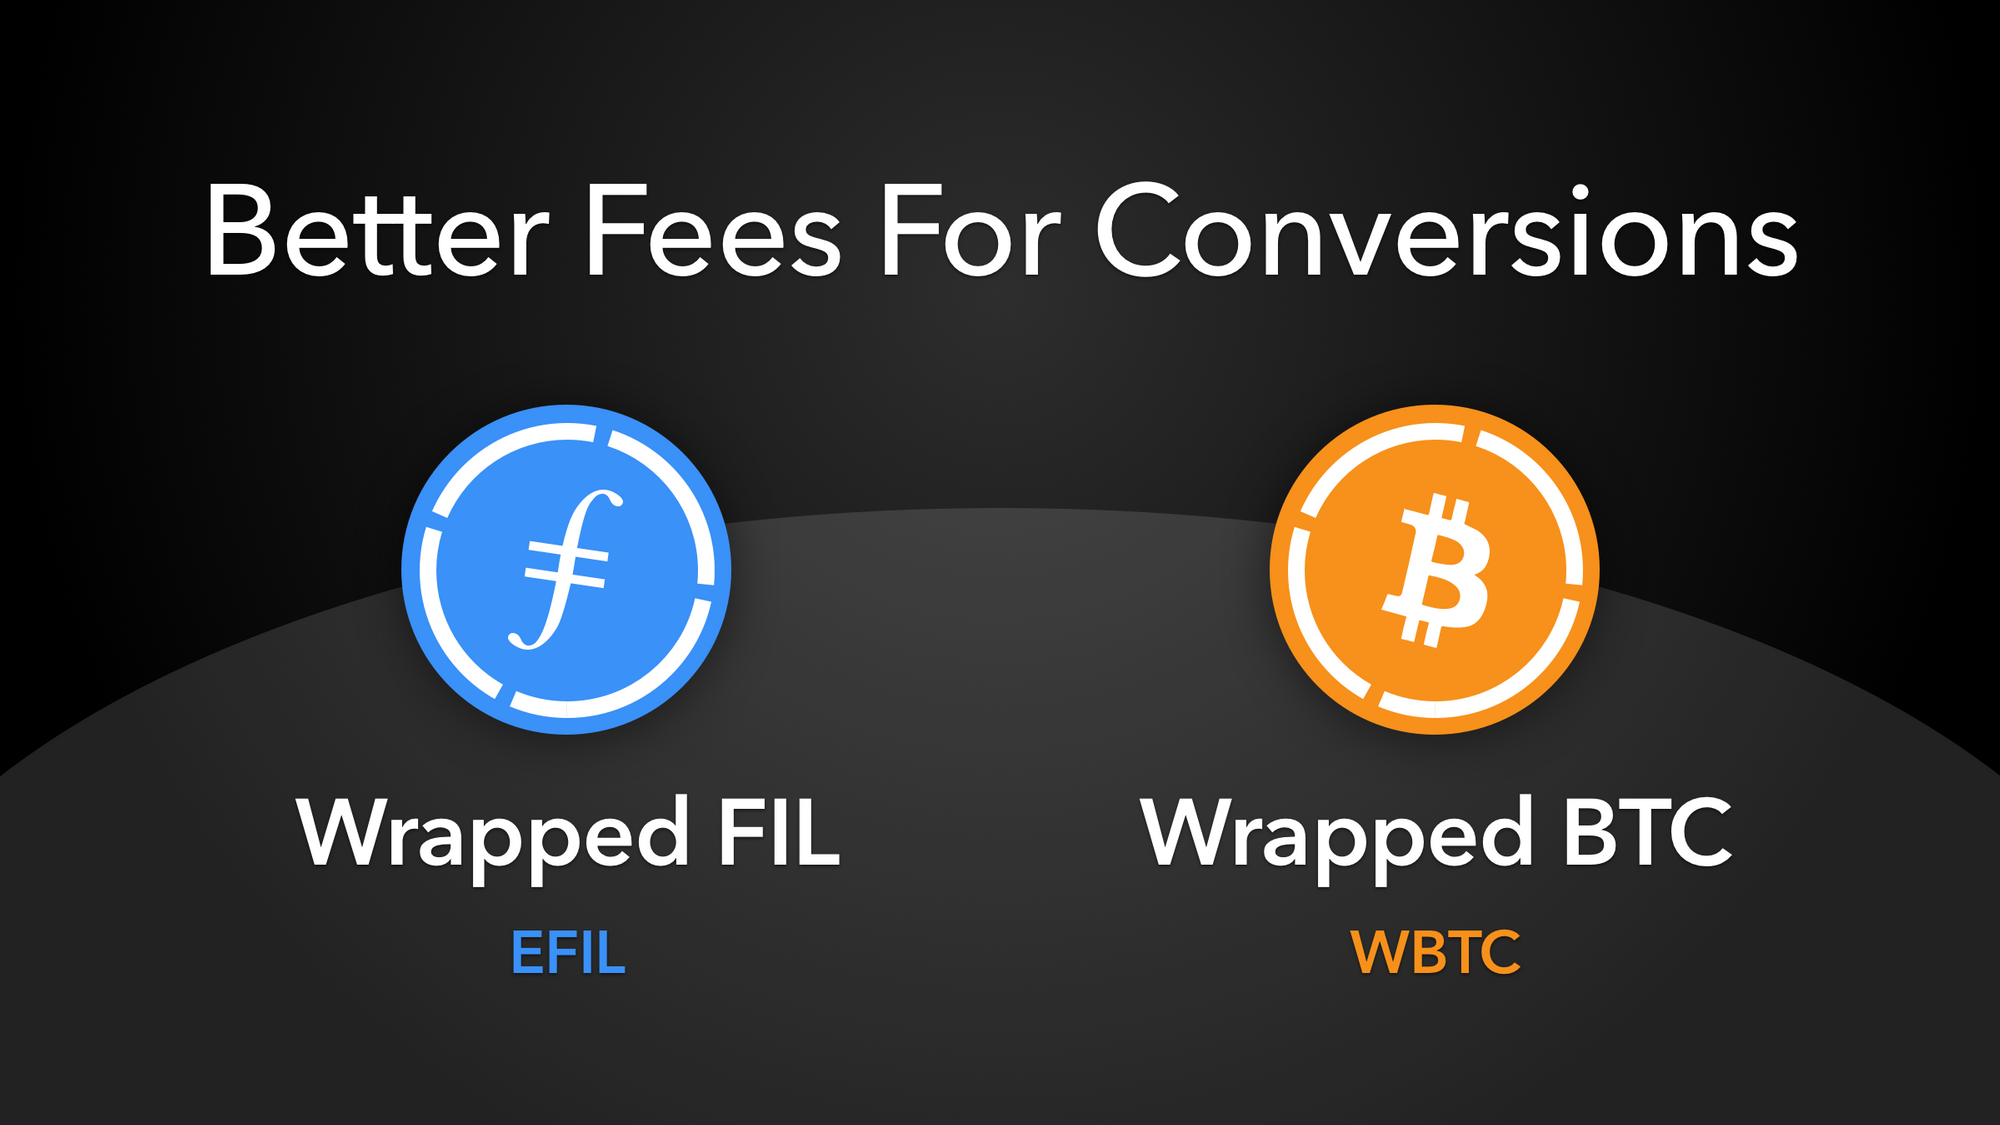 Improving Our Conversion Fees For Wrapped Bitcoin (WBTC) And Wrapped Filecoin (EFIL)